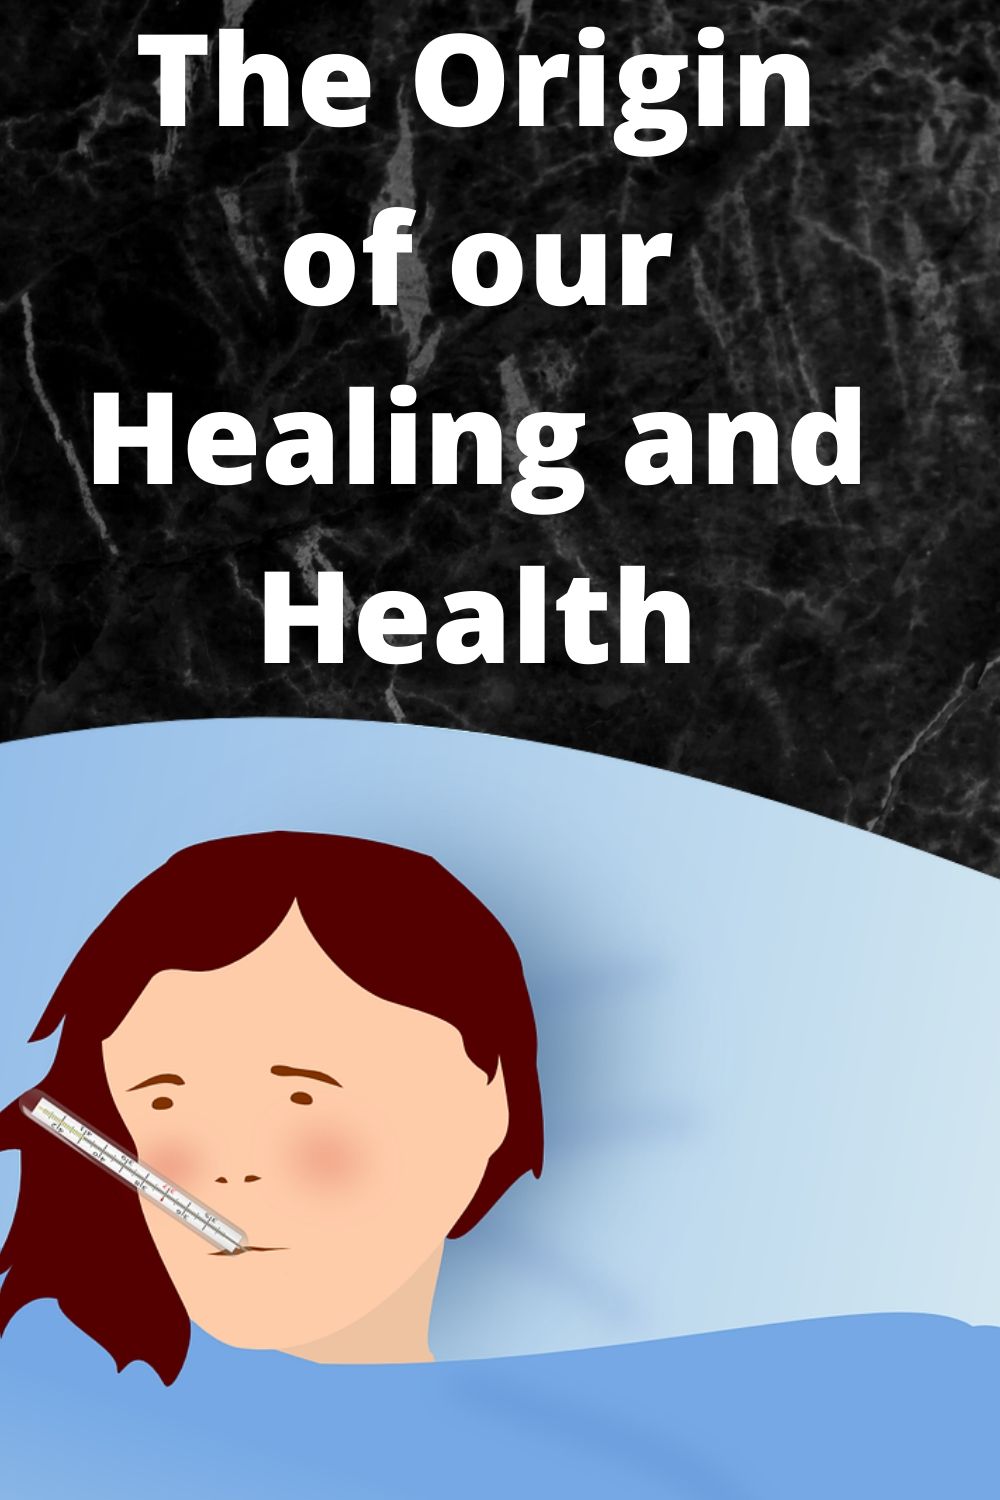 Diseases: The origin of our healing and health